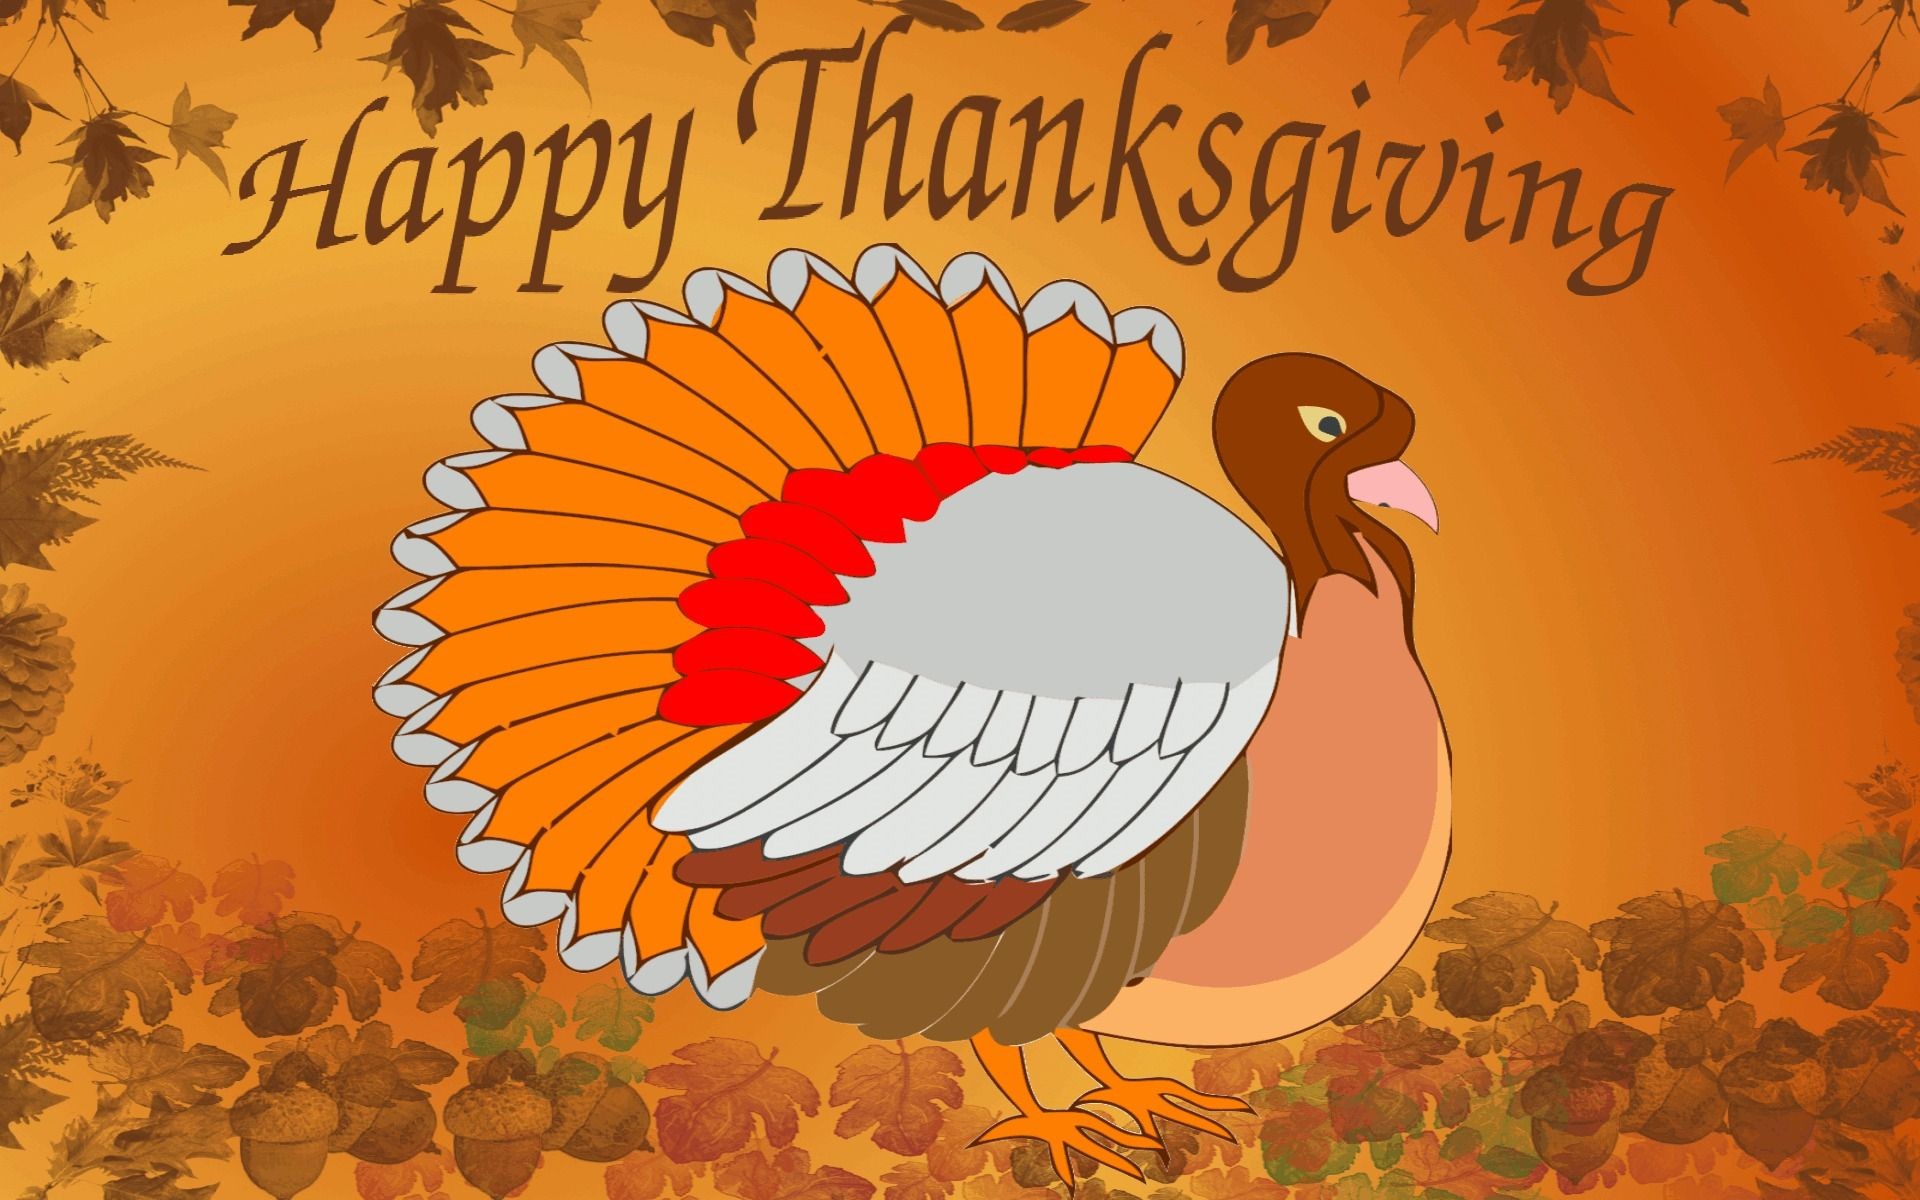 1920x1200 Wishing you blessings of health, happiness and Success on thanksgiving and  always!